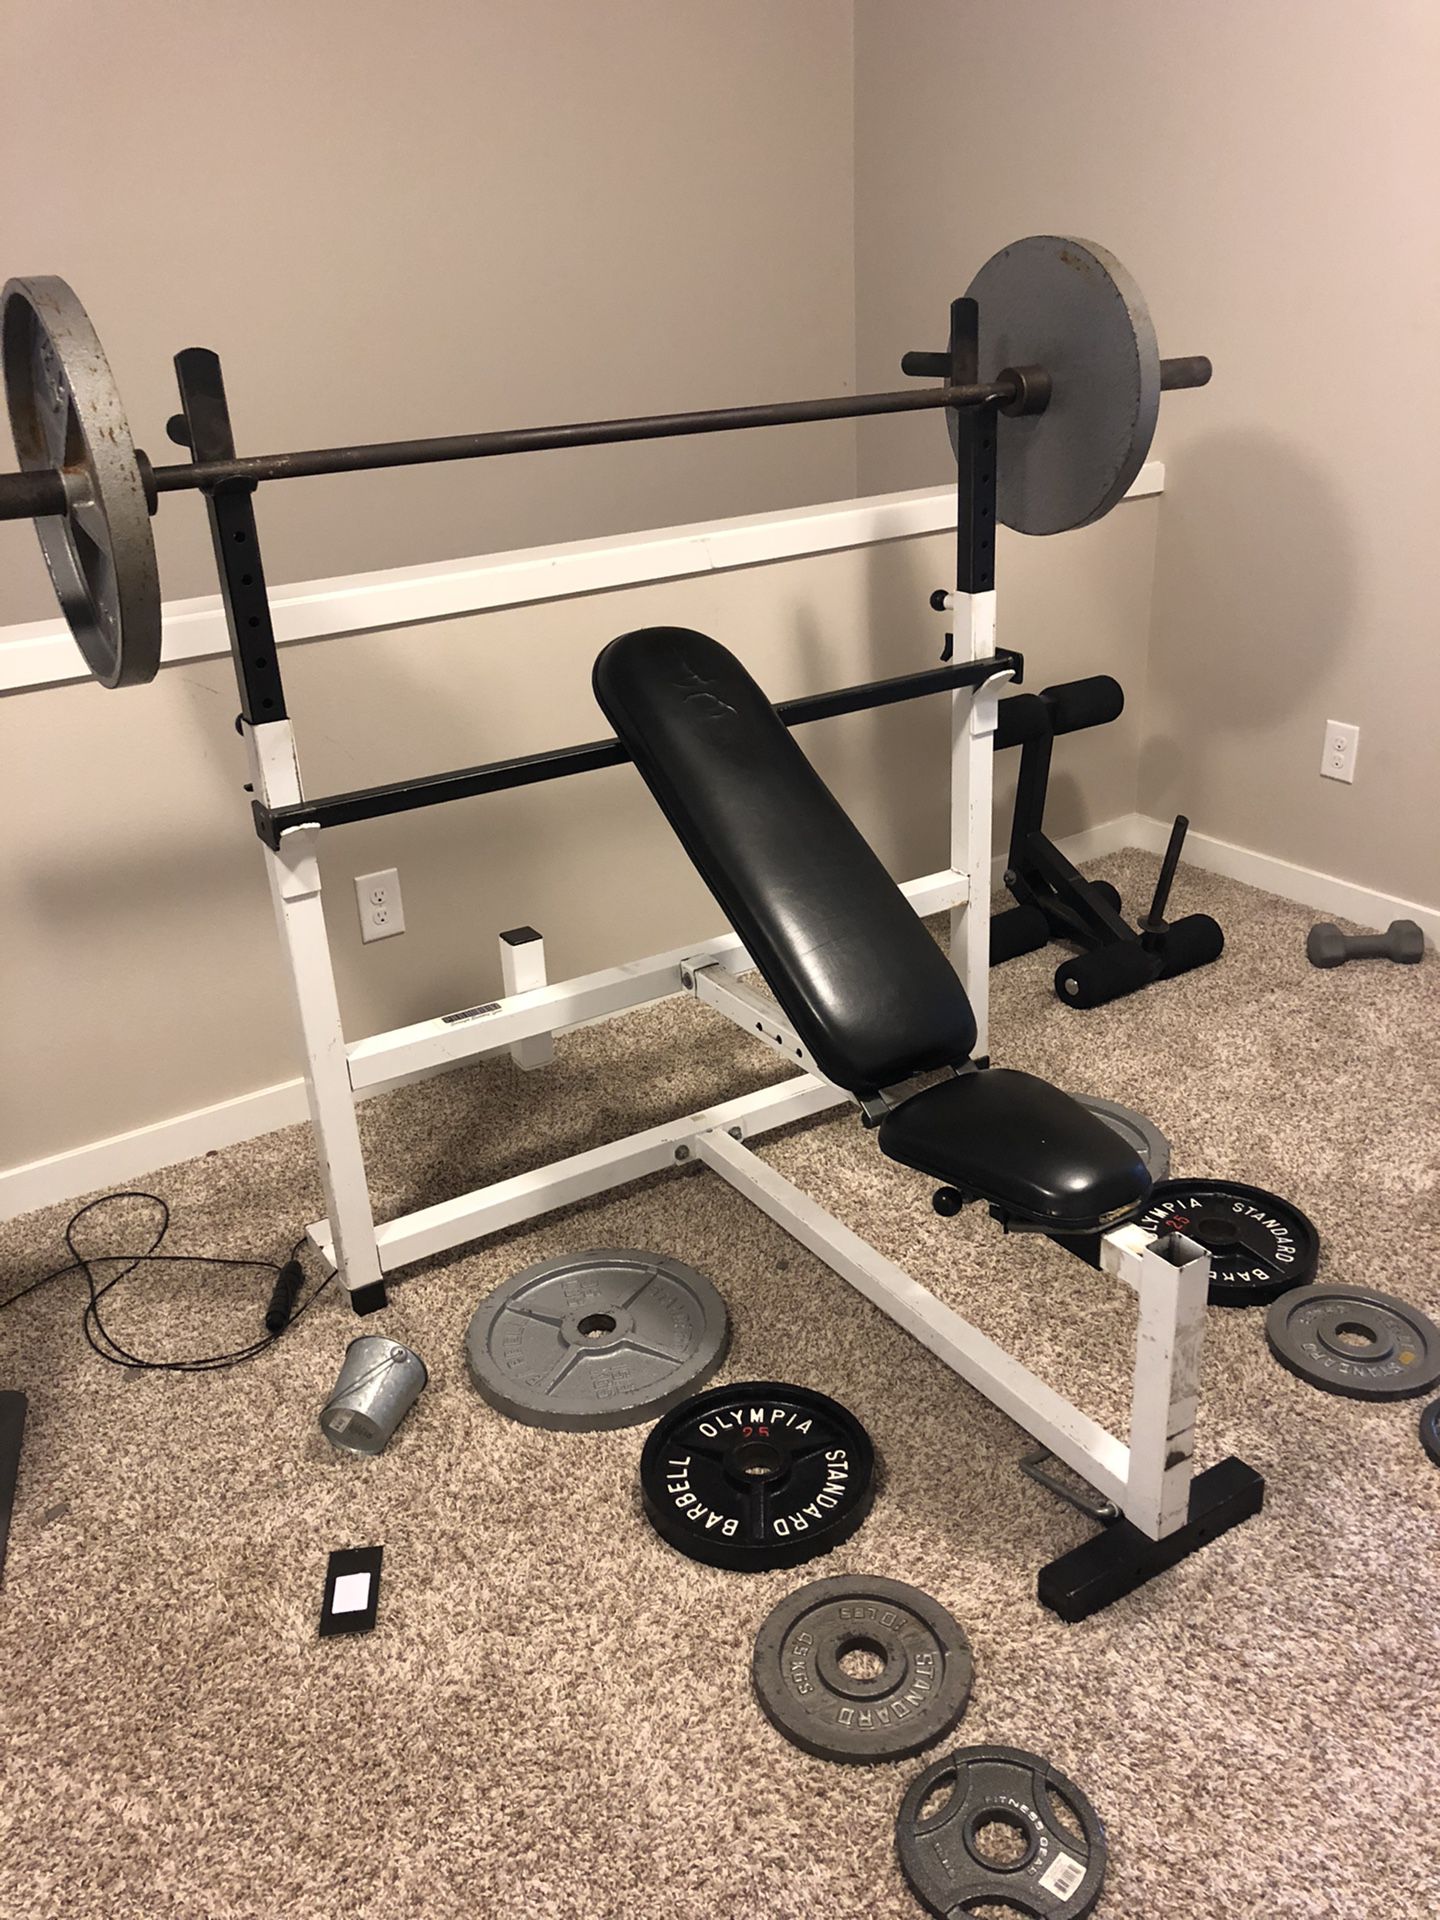 Bench Press with 285 Lbs of Plates